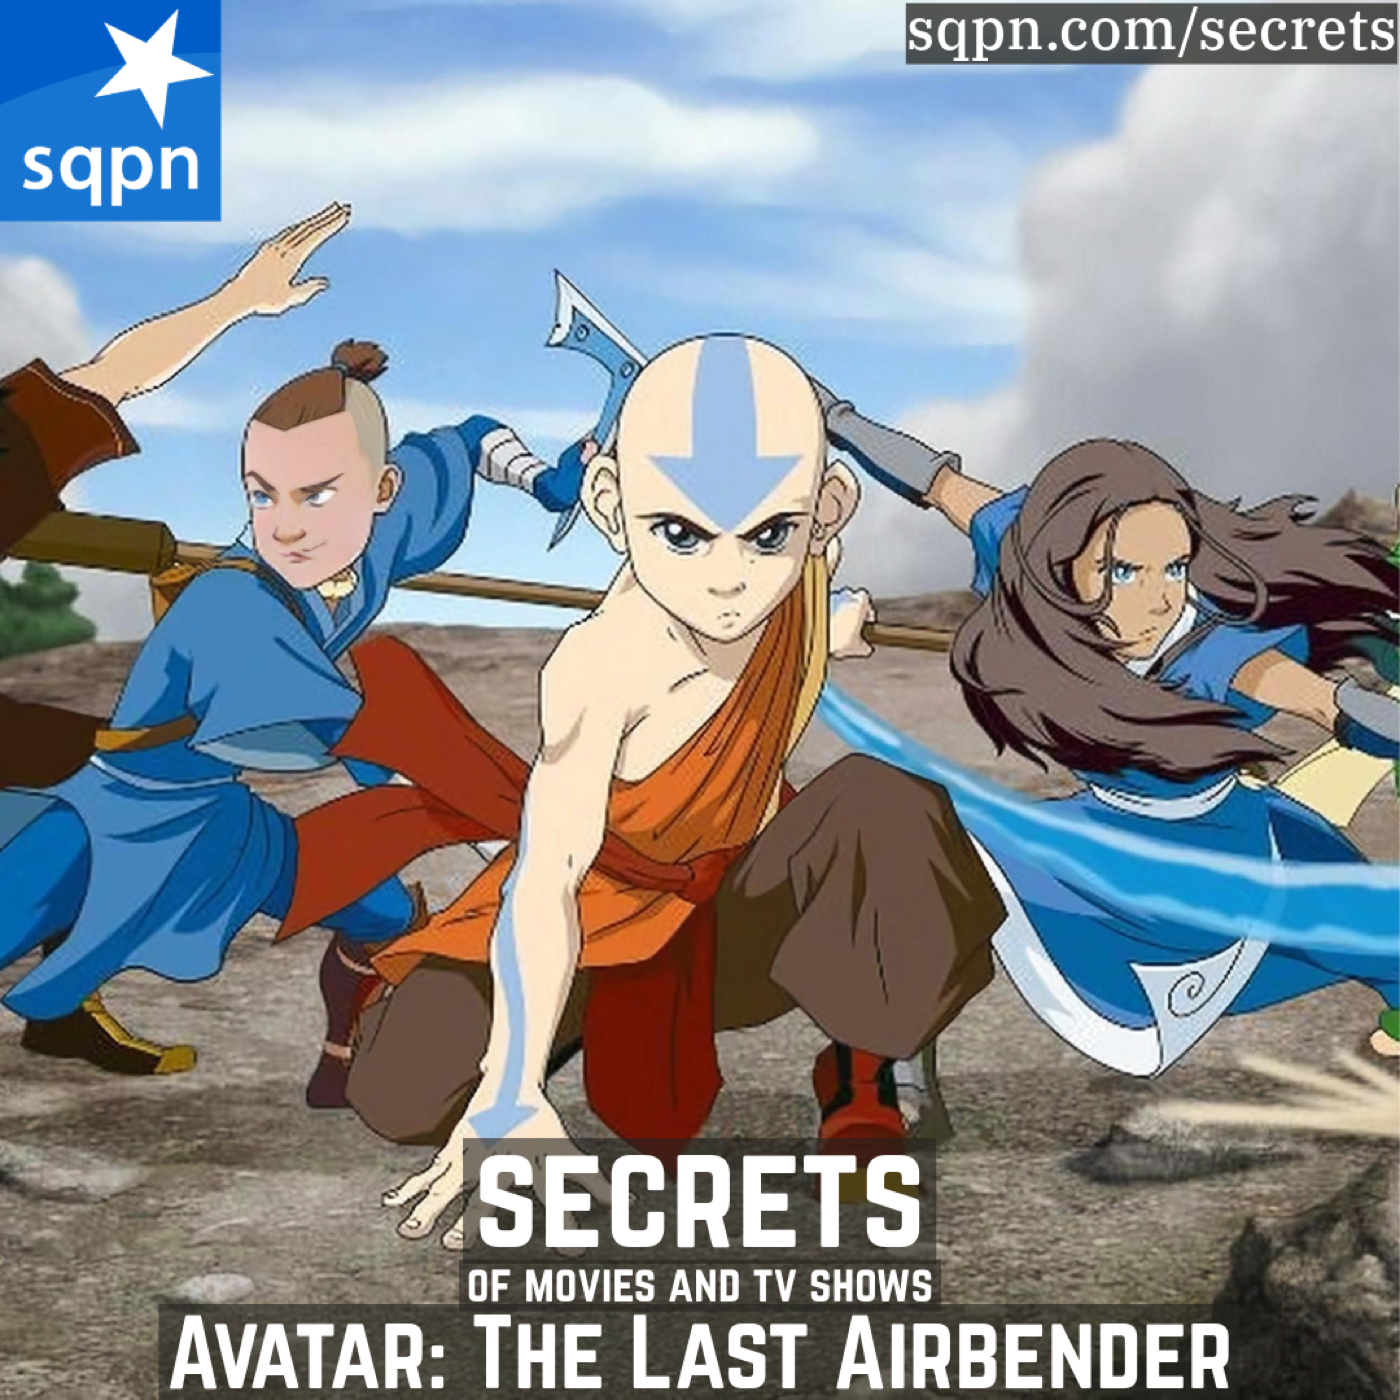 The Secrets of Avatar: The Last Airbender